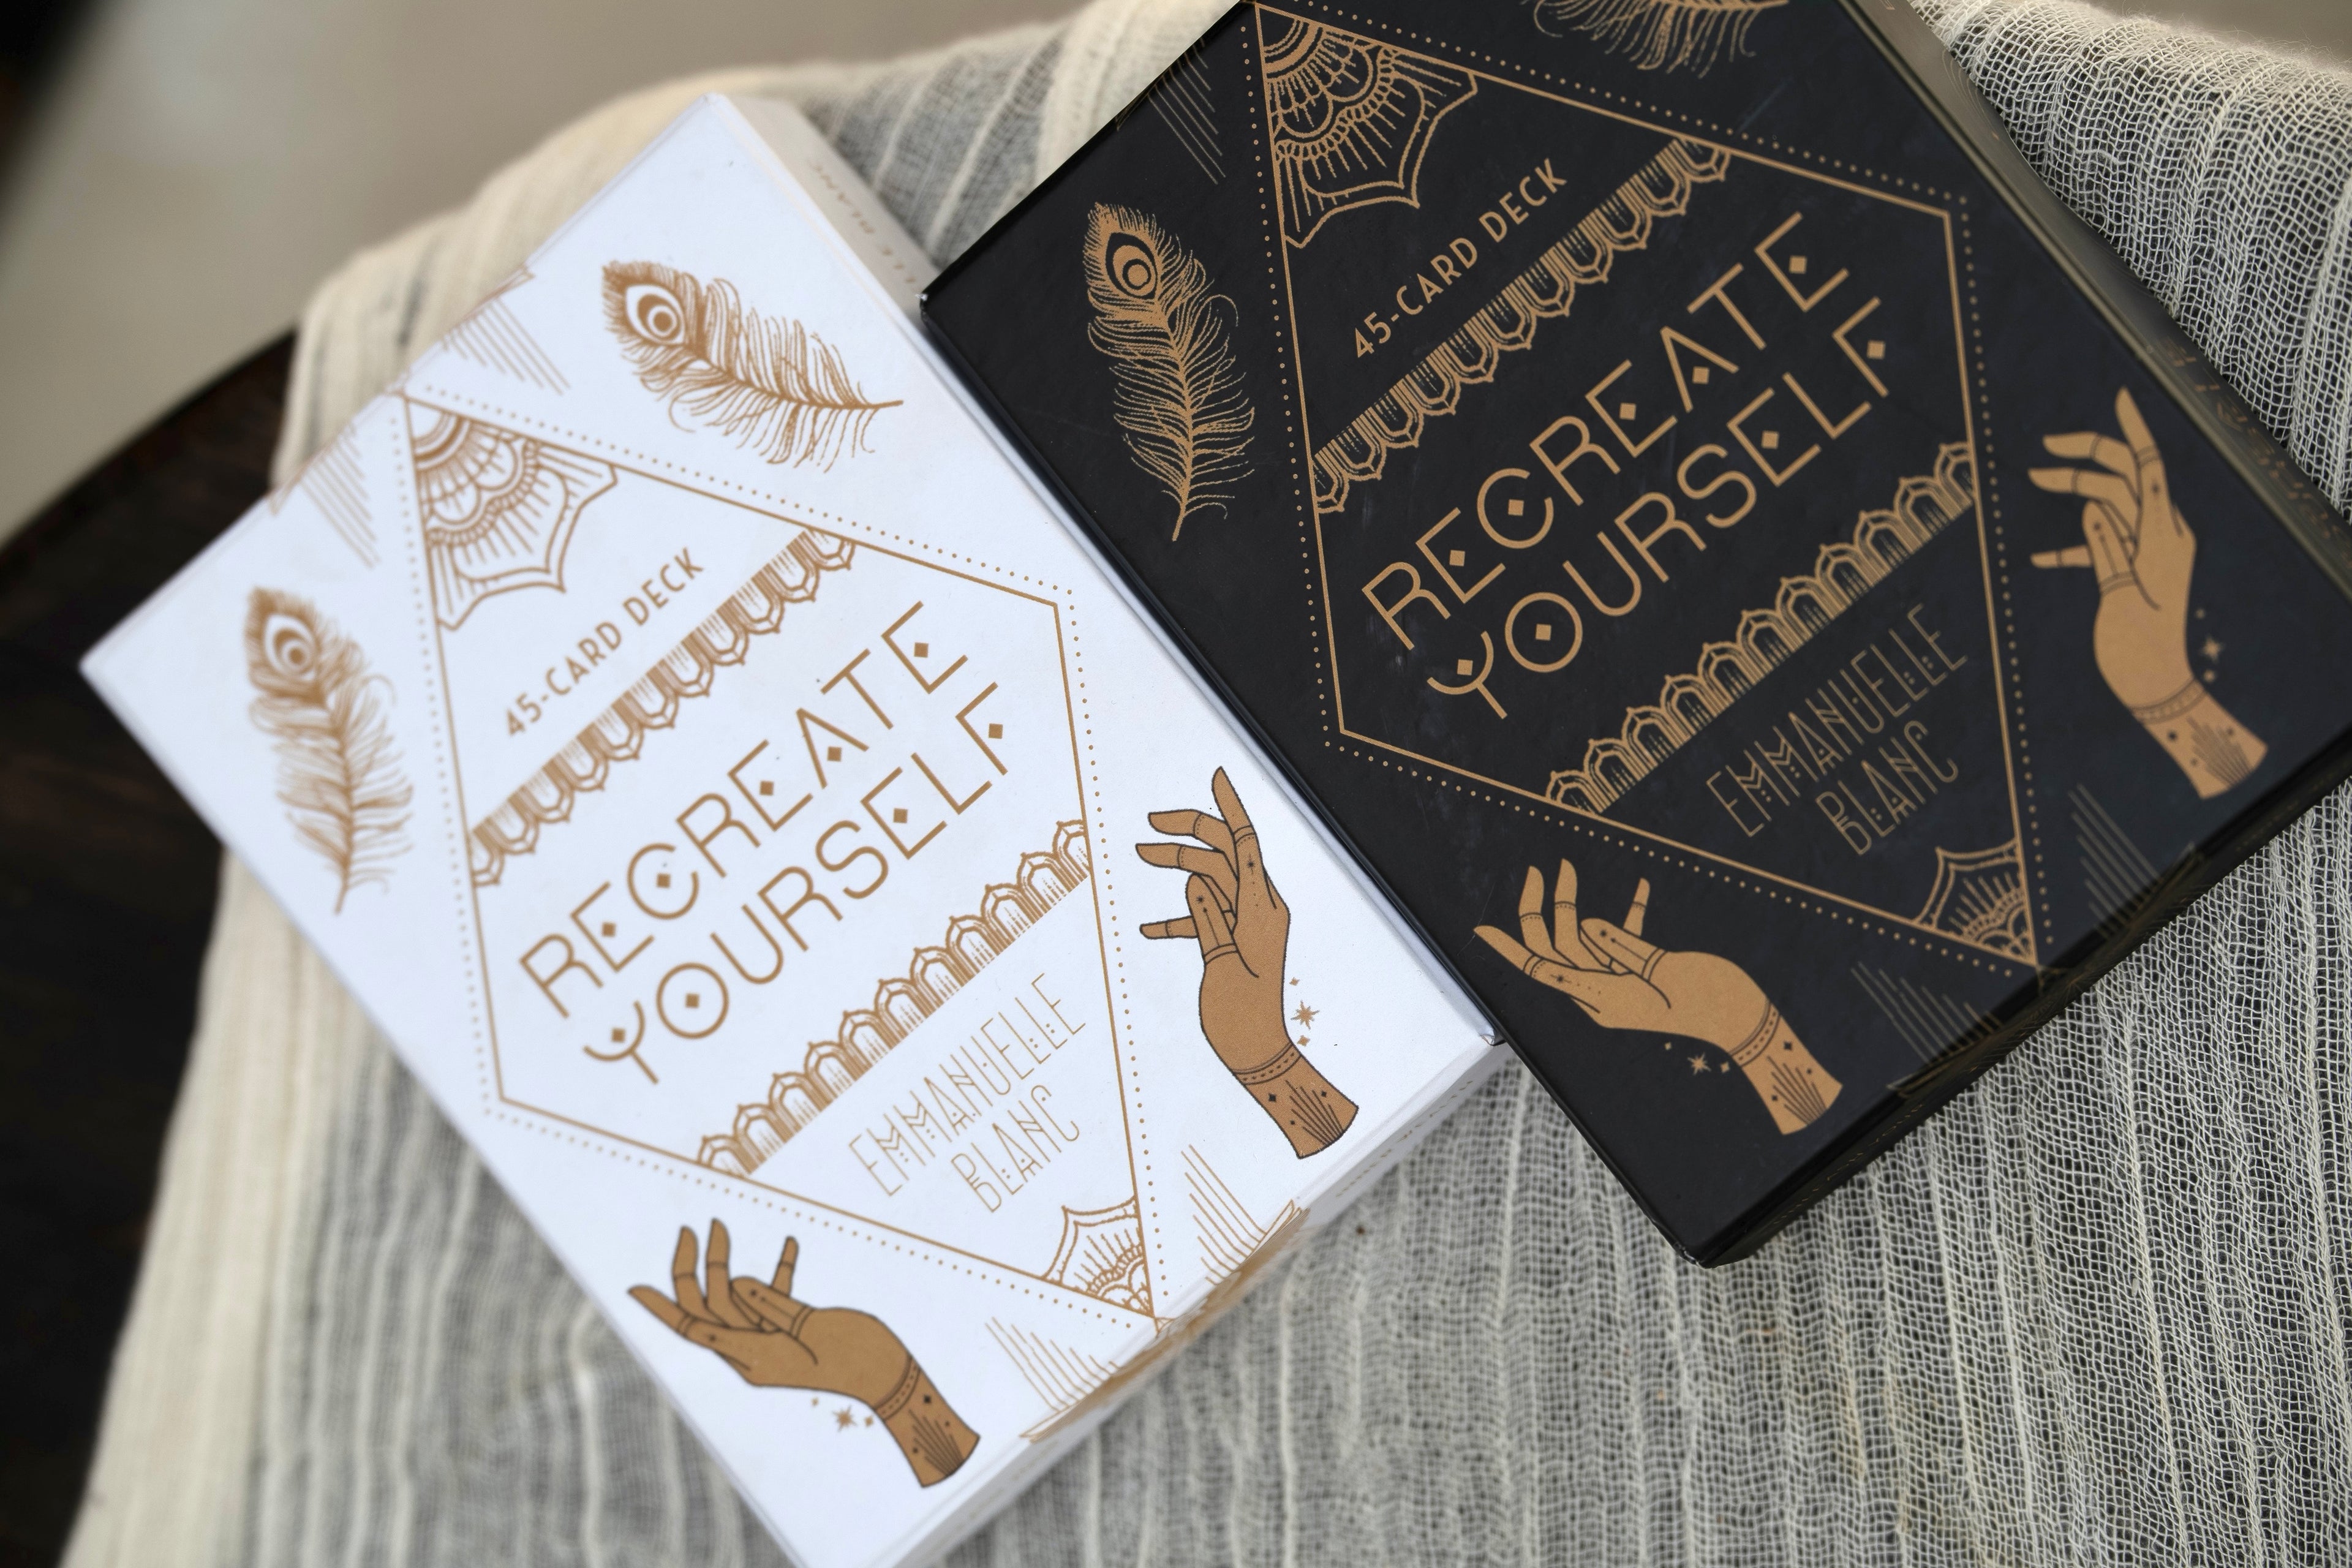 The Recreate Yourself 45-card deck comes in 2 colors, white and gold, black &amp; gold with guidebook